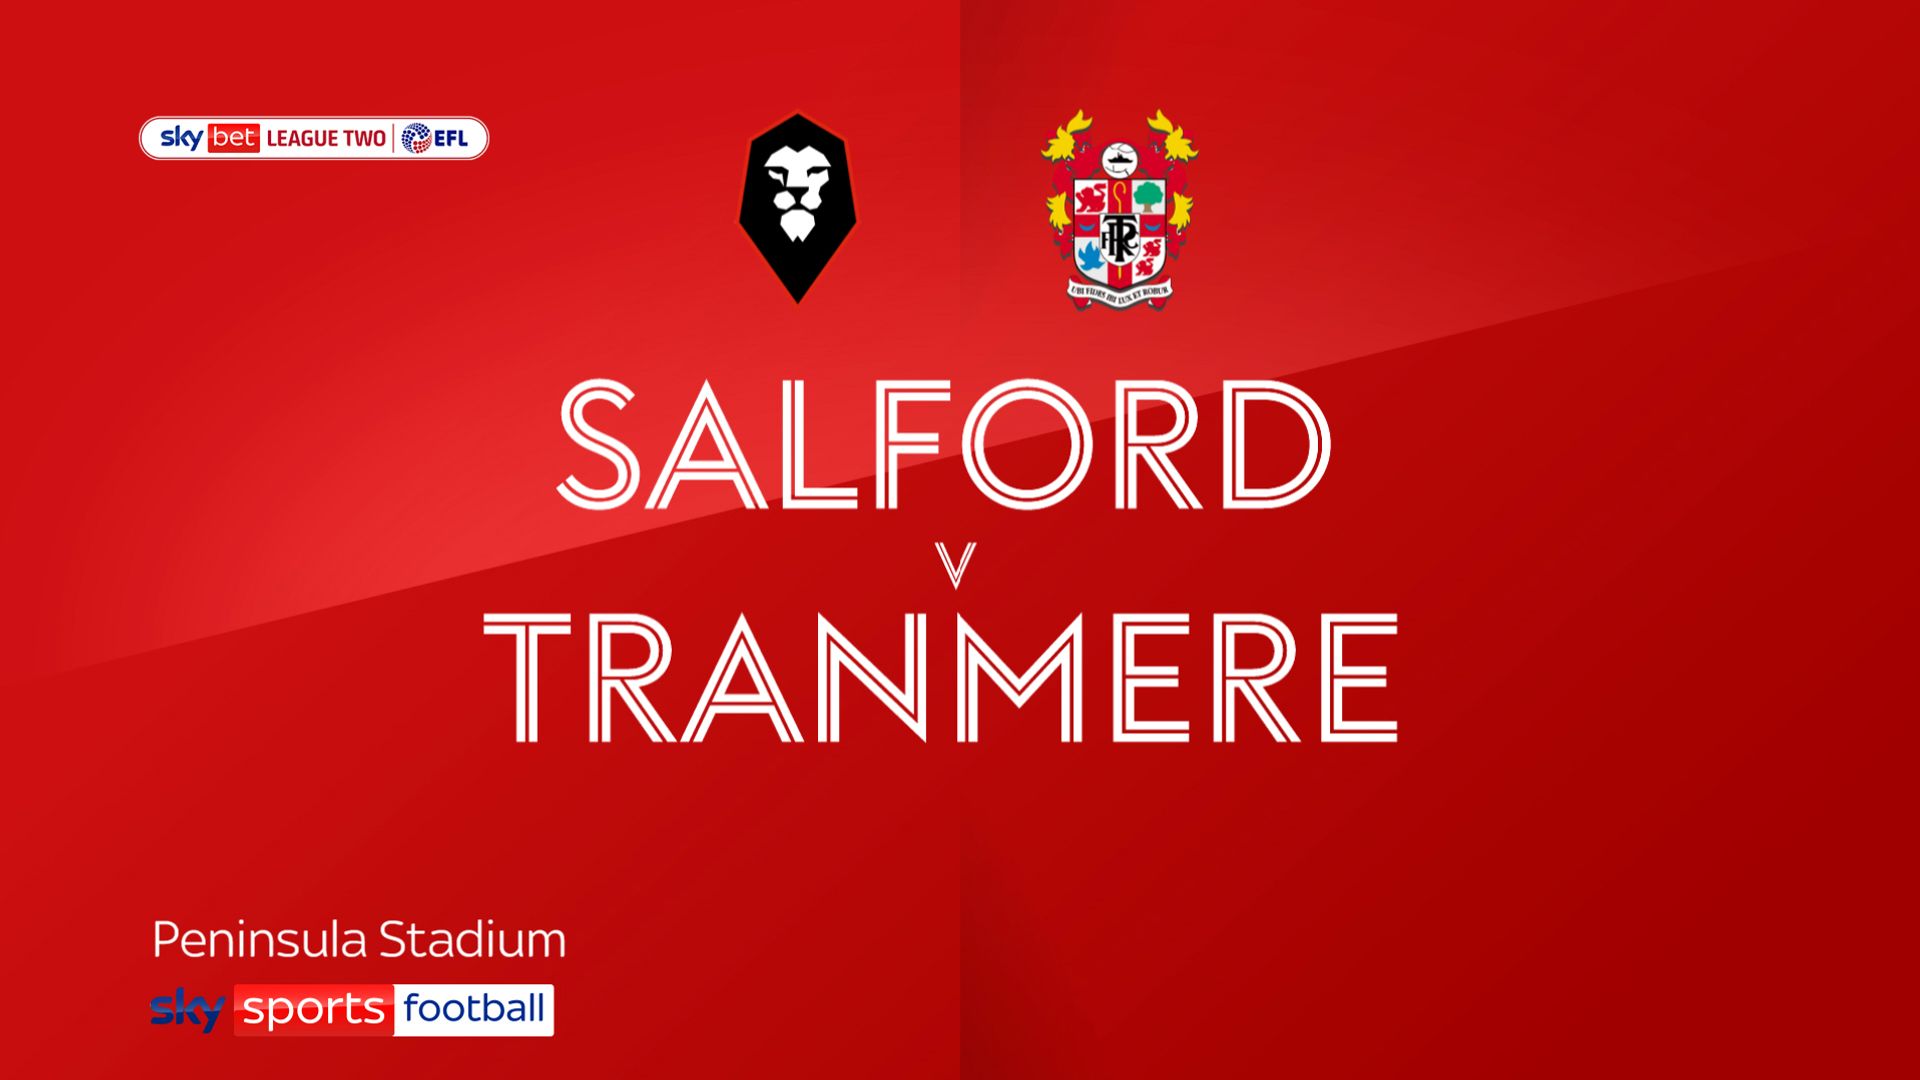 Salford 1-1 Tranmere: Paul Glatzel rescues point for high-flying Rovers